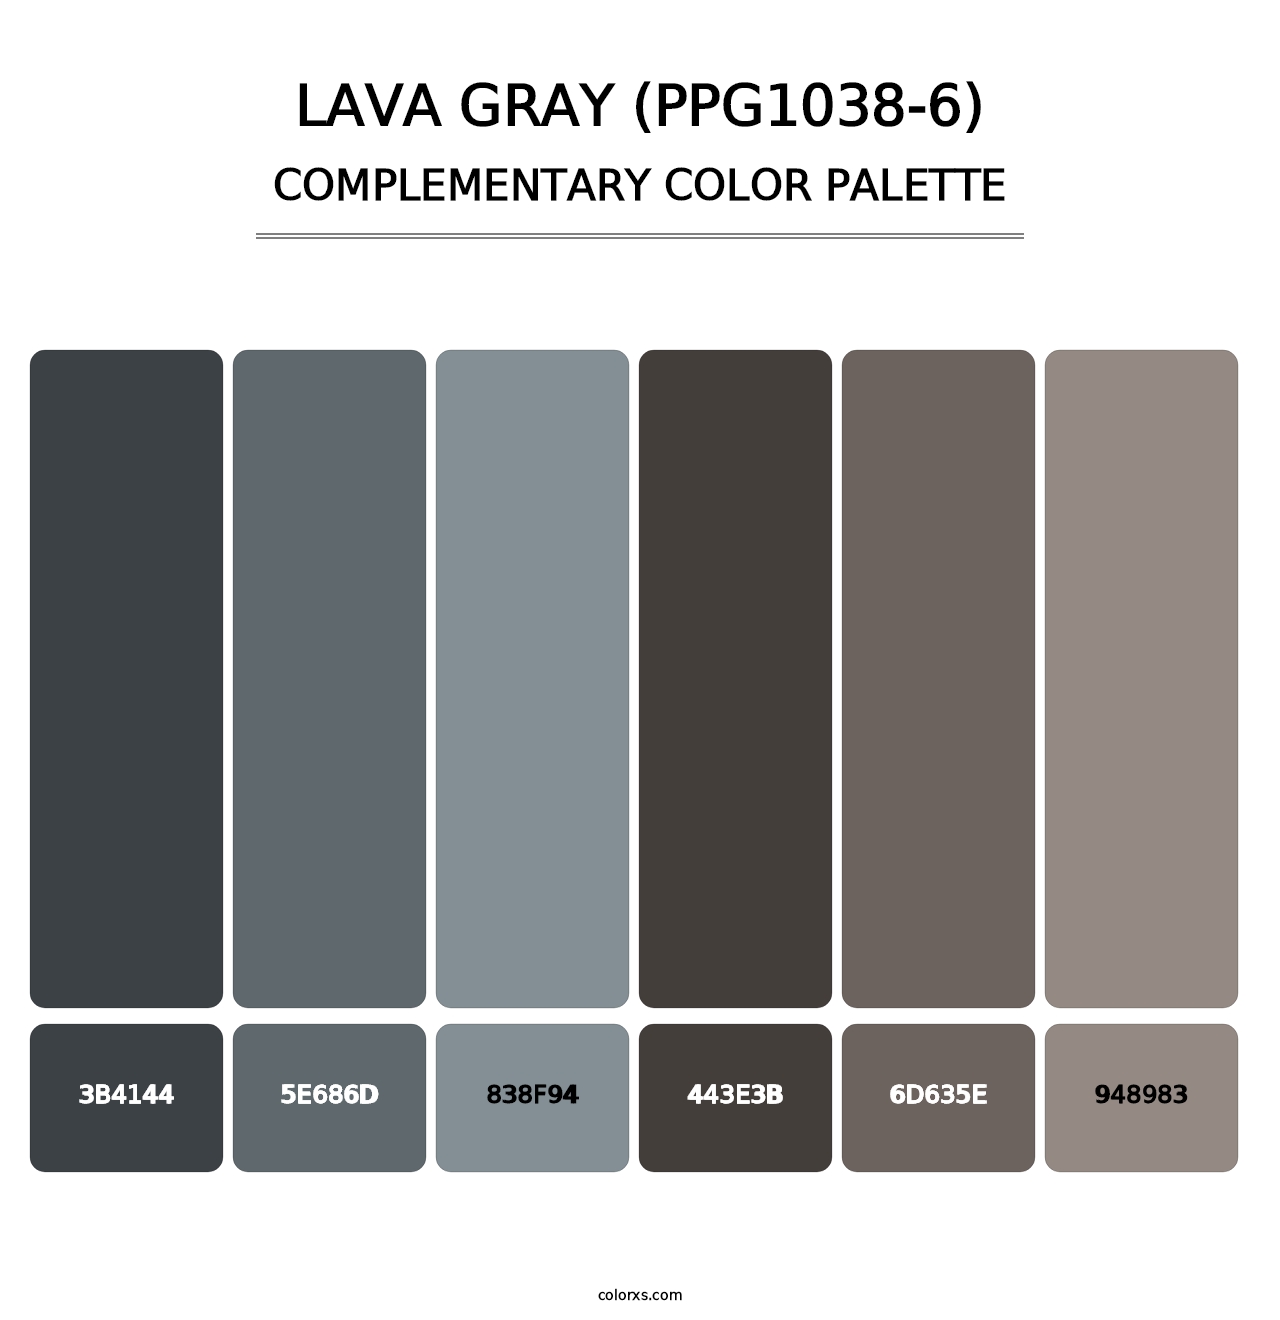 Lava Gray (PPG1038-6) - Complementary Color Palette